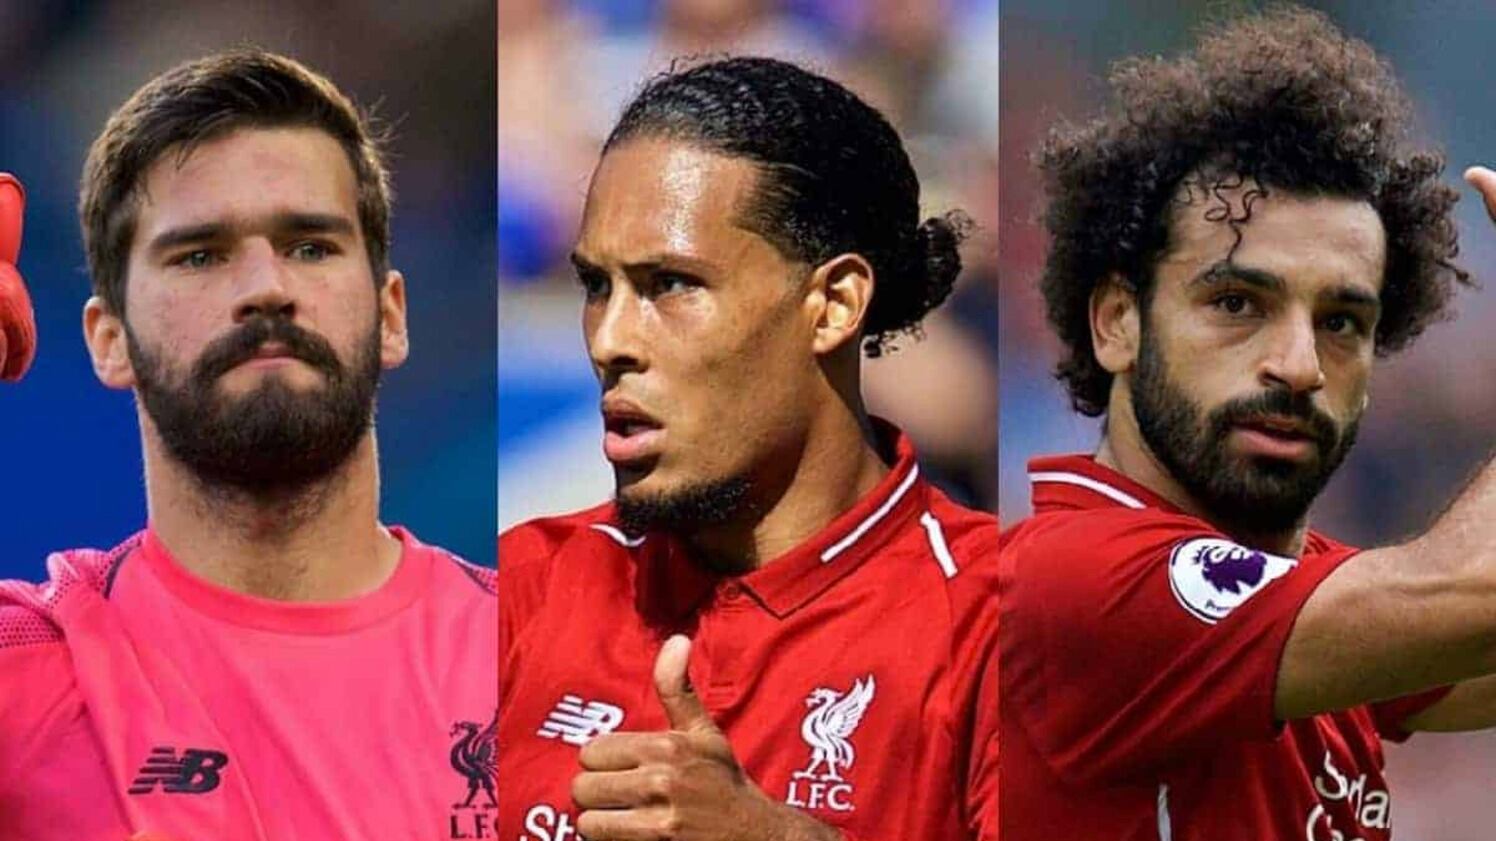 Micheal Edwards will leave Liverpool at the end of the season, see the top 5 players he signed including Salah and Van Dijk